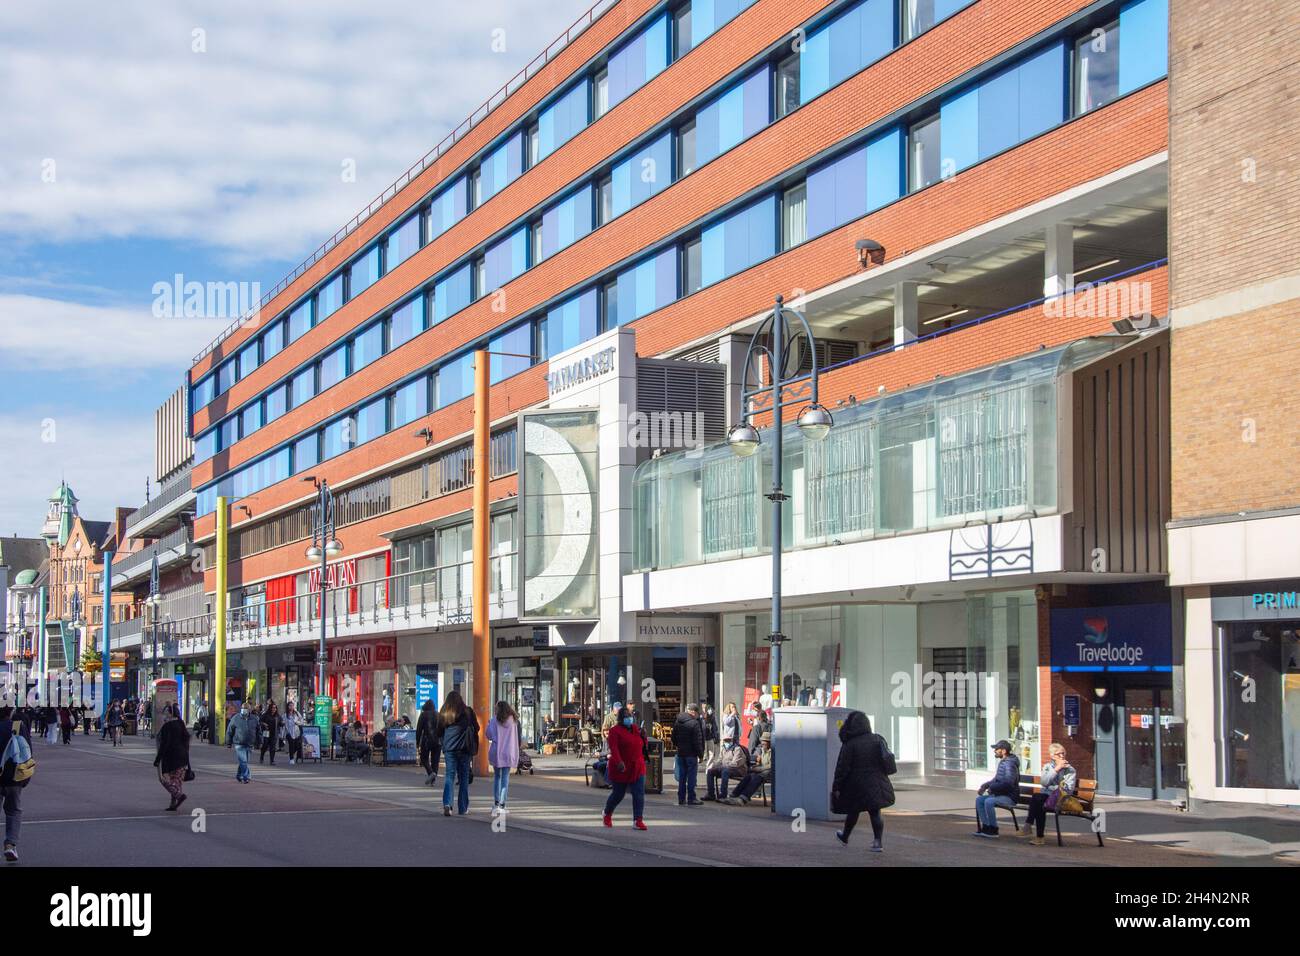 Haymarket Shopping Centre, Humberstone Gate, Town Centre, City of Leicester, Leicestershire, England, United Kingdom Stock Photo